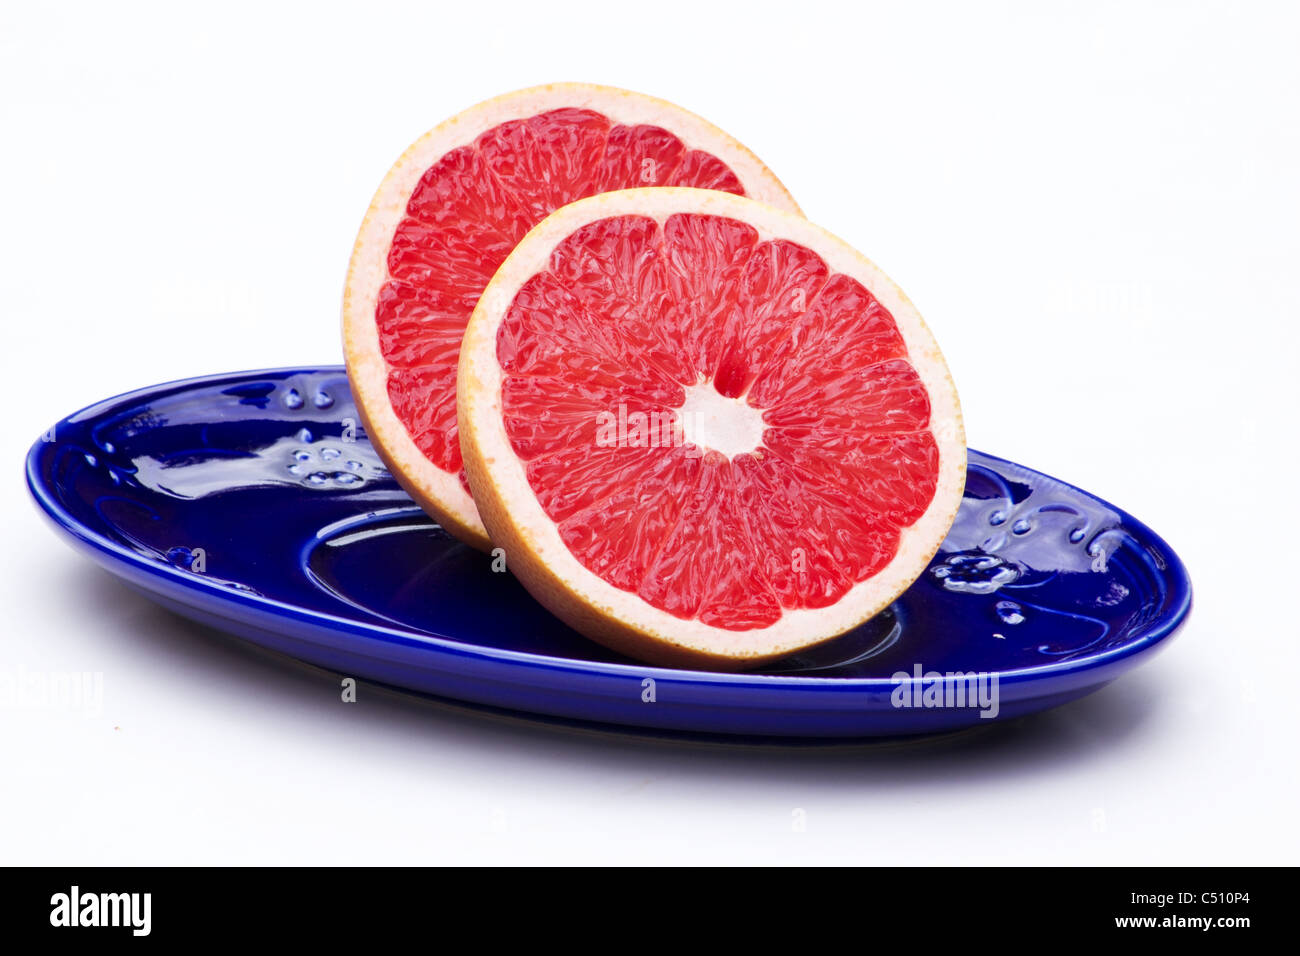 Close-up of grapefruit cut in half in a blue dish on white background Stock Photo